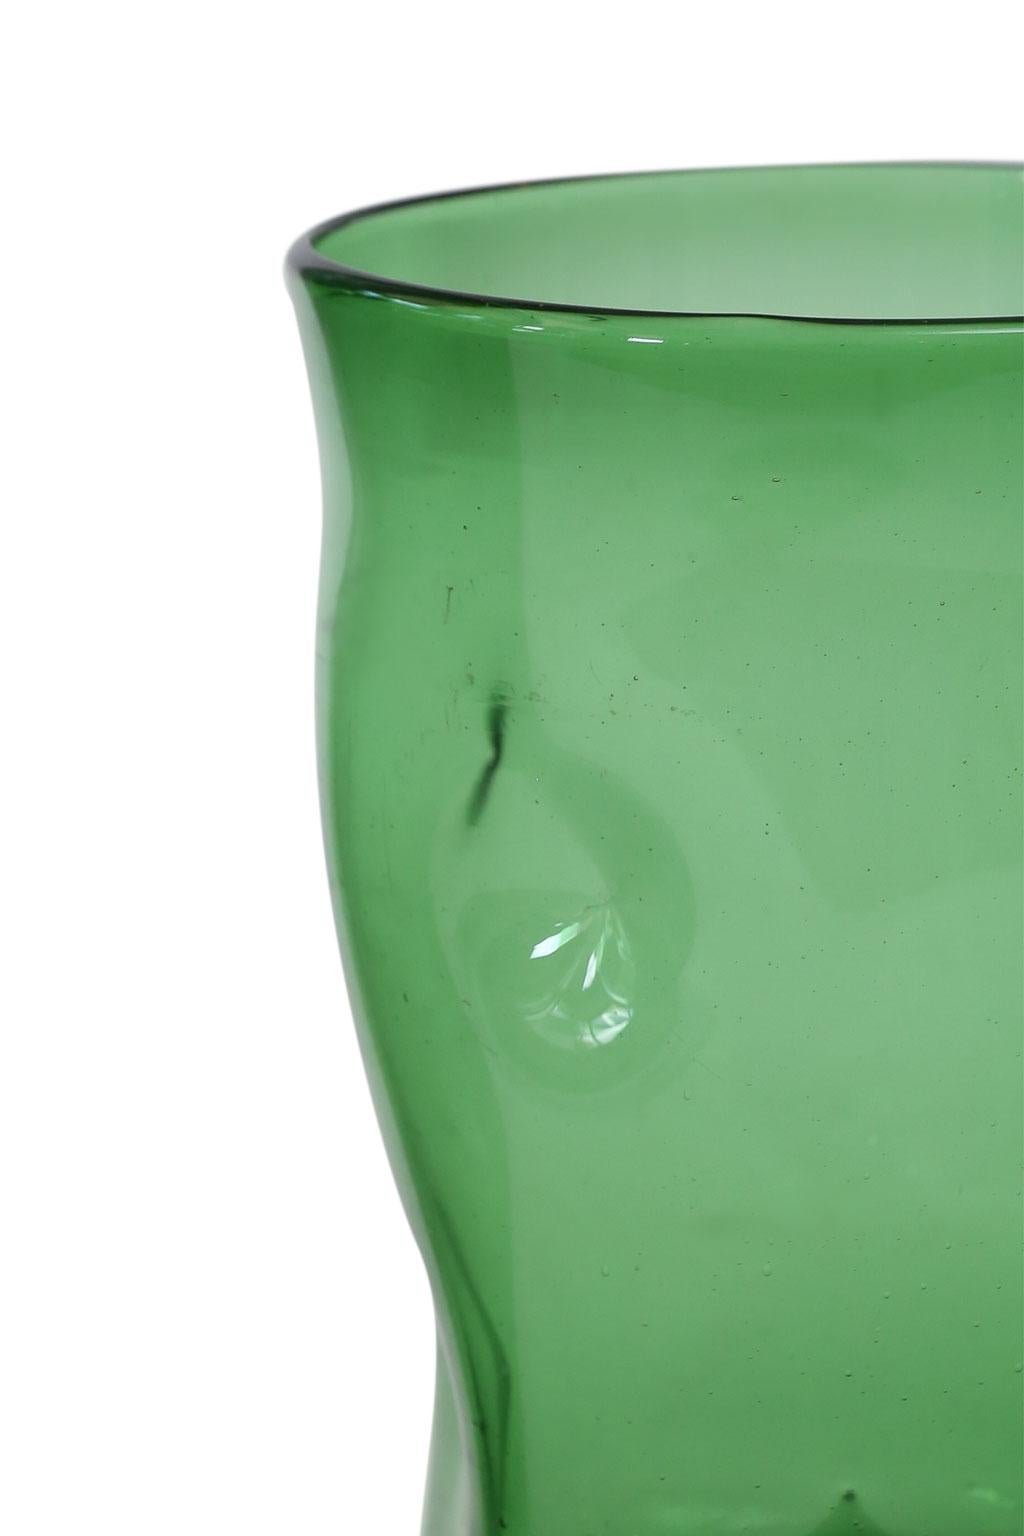 Italian green glass vase by Empoli, circa 1960. Vase’s surface is decorated in dimples.